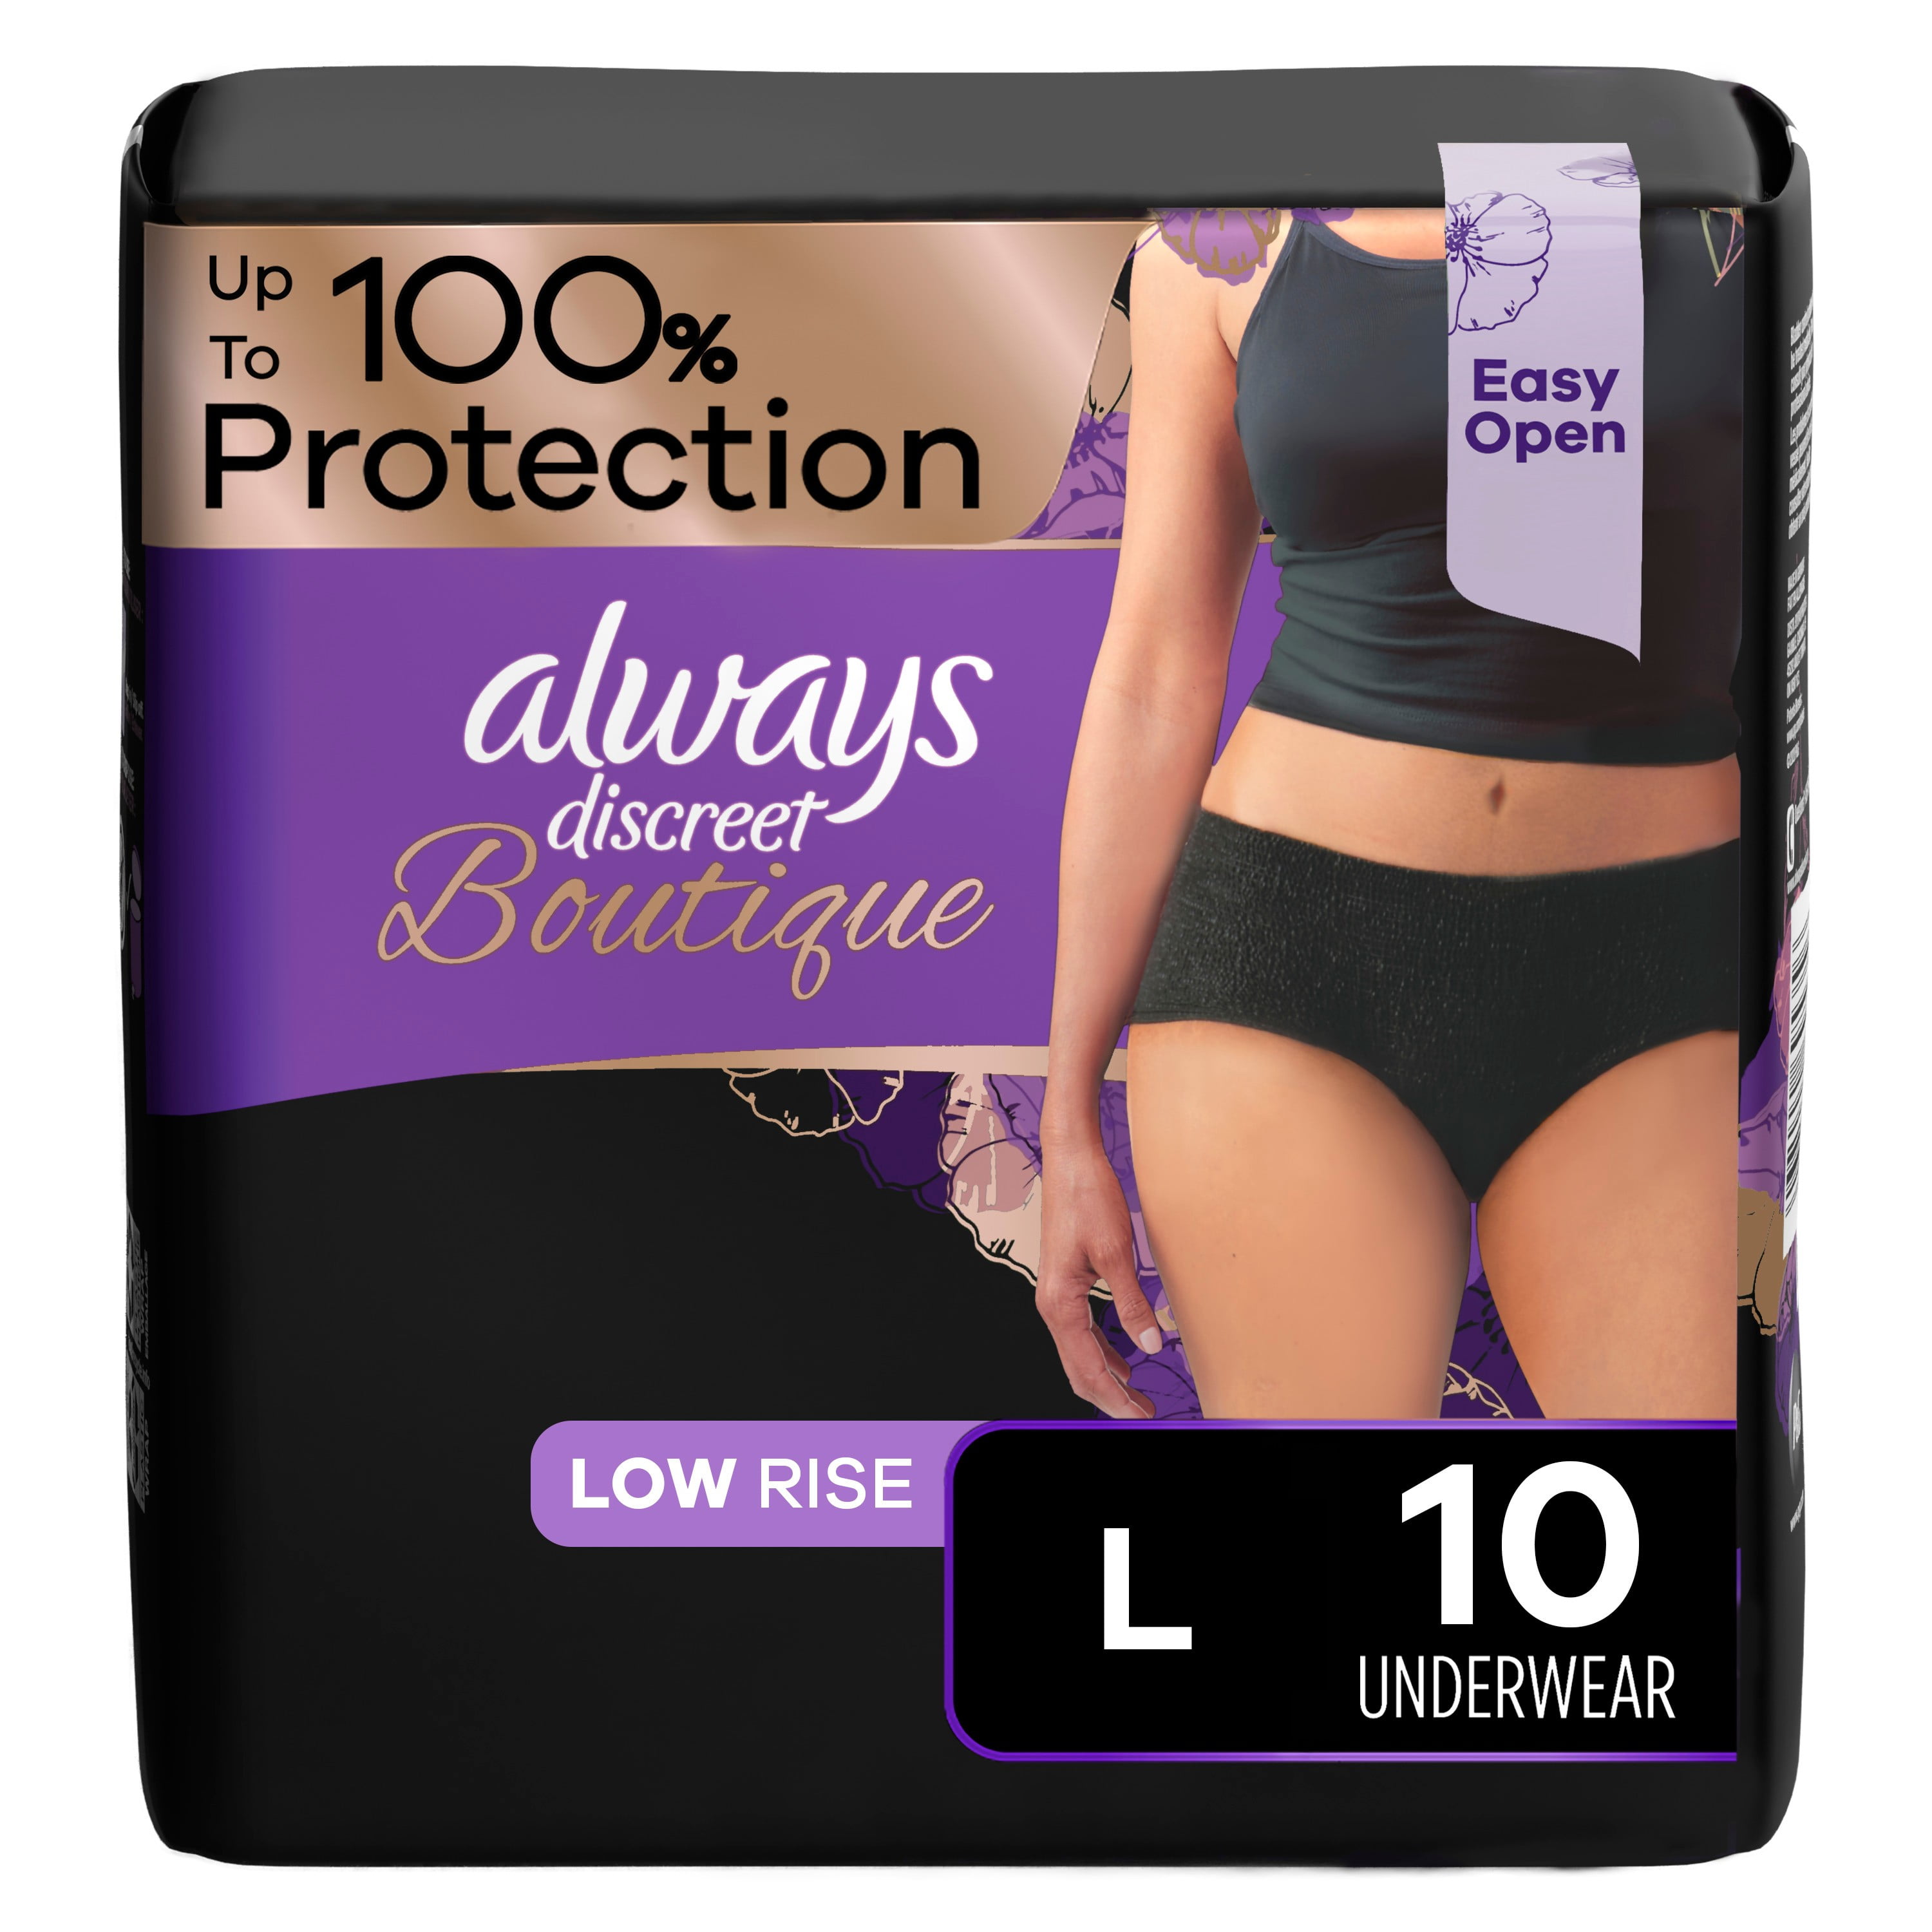 Always Boutique Incontinence and Postpartum Underwear for Women, Maximum  Protection, XL, Rosy, 9 Count - 9 ea